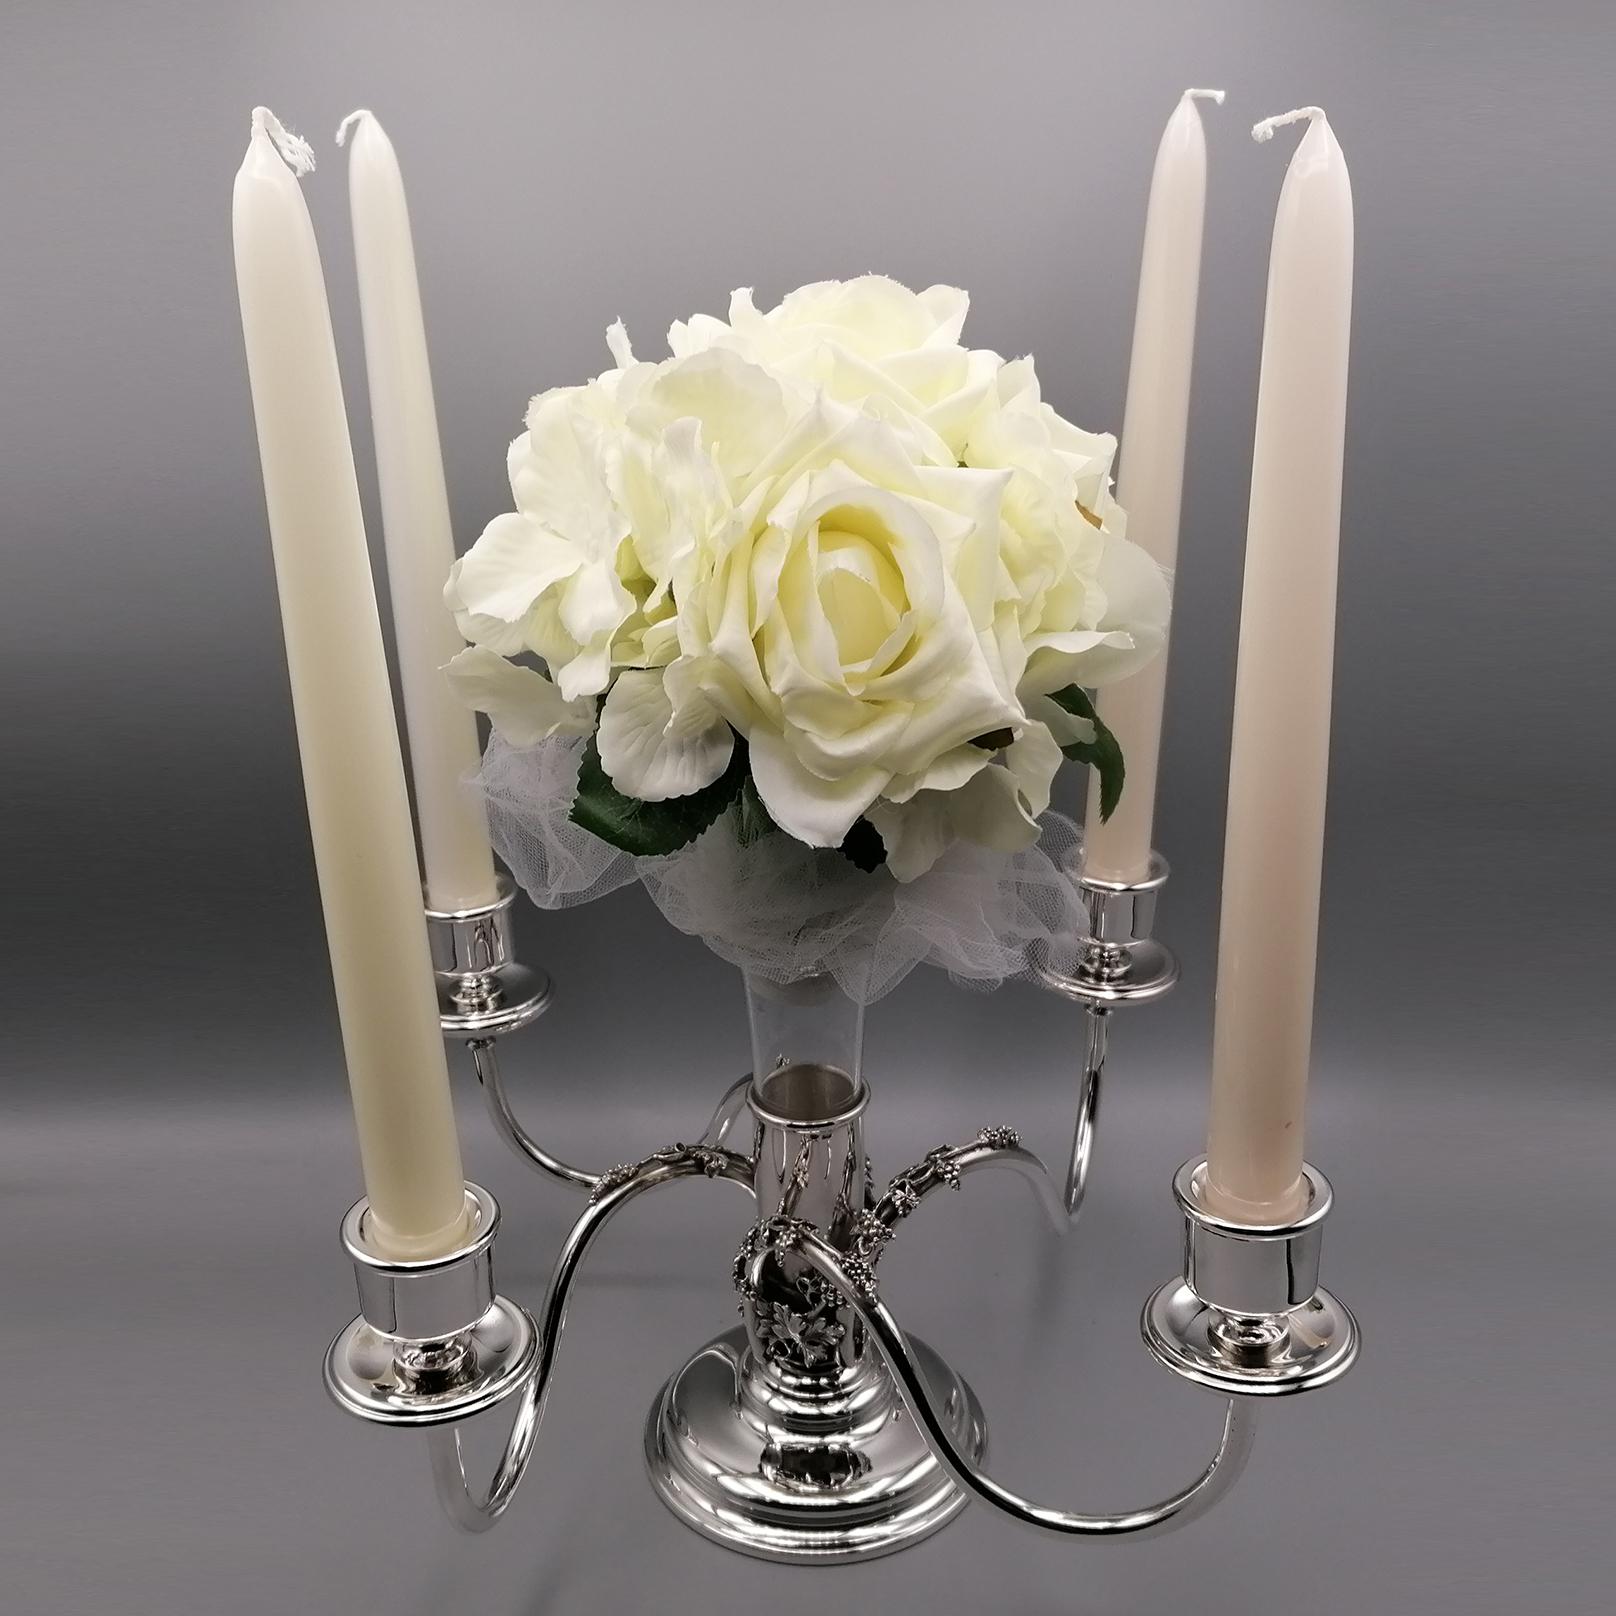 Other 20th Century Italian 4 Light Candelabra with Flower Holder For Sale